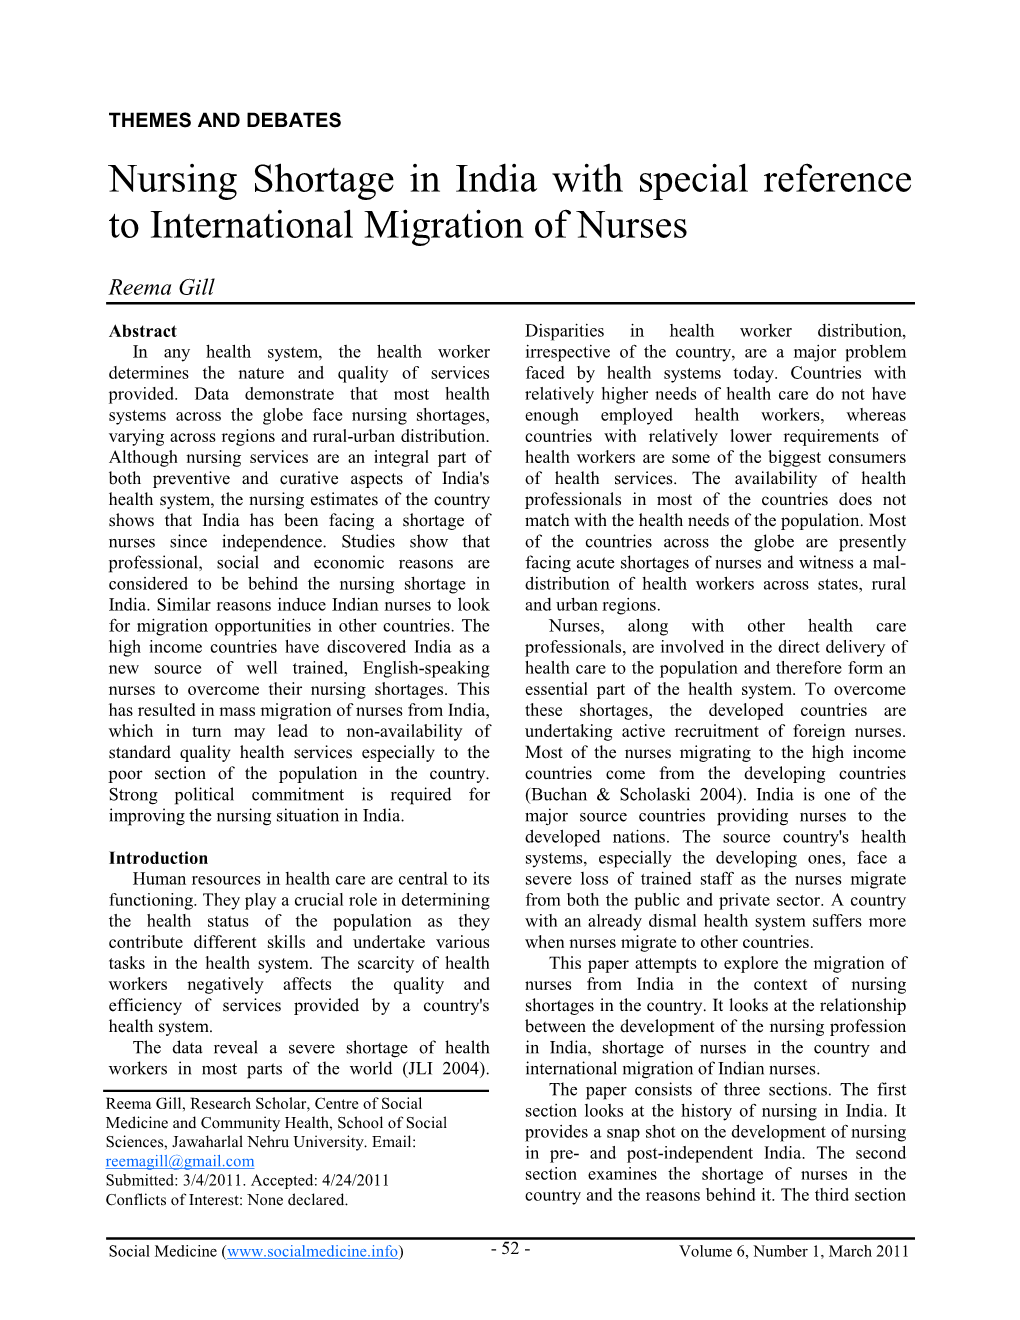 Nursing Shortage in India with Special Reference to International Migration of Nurses